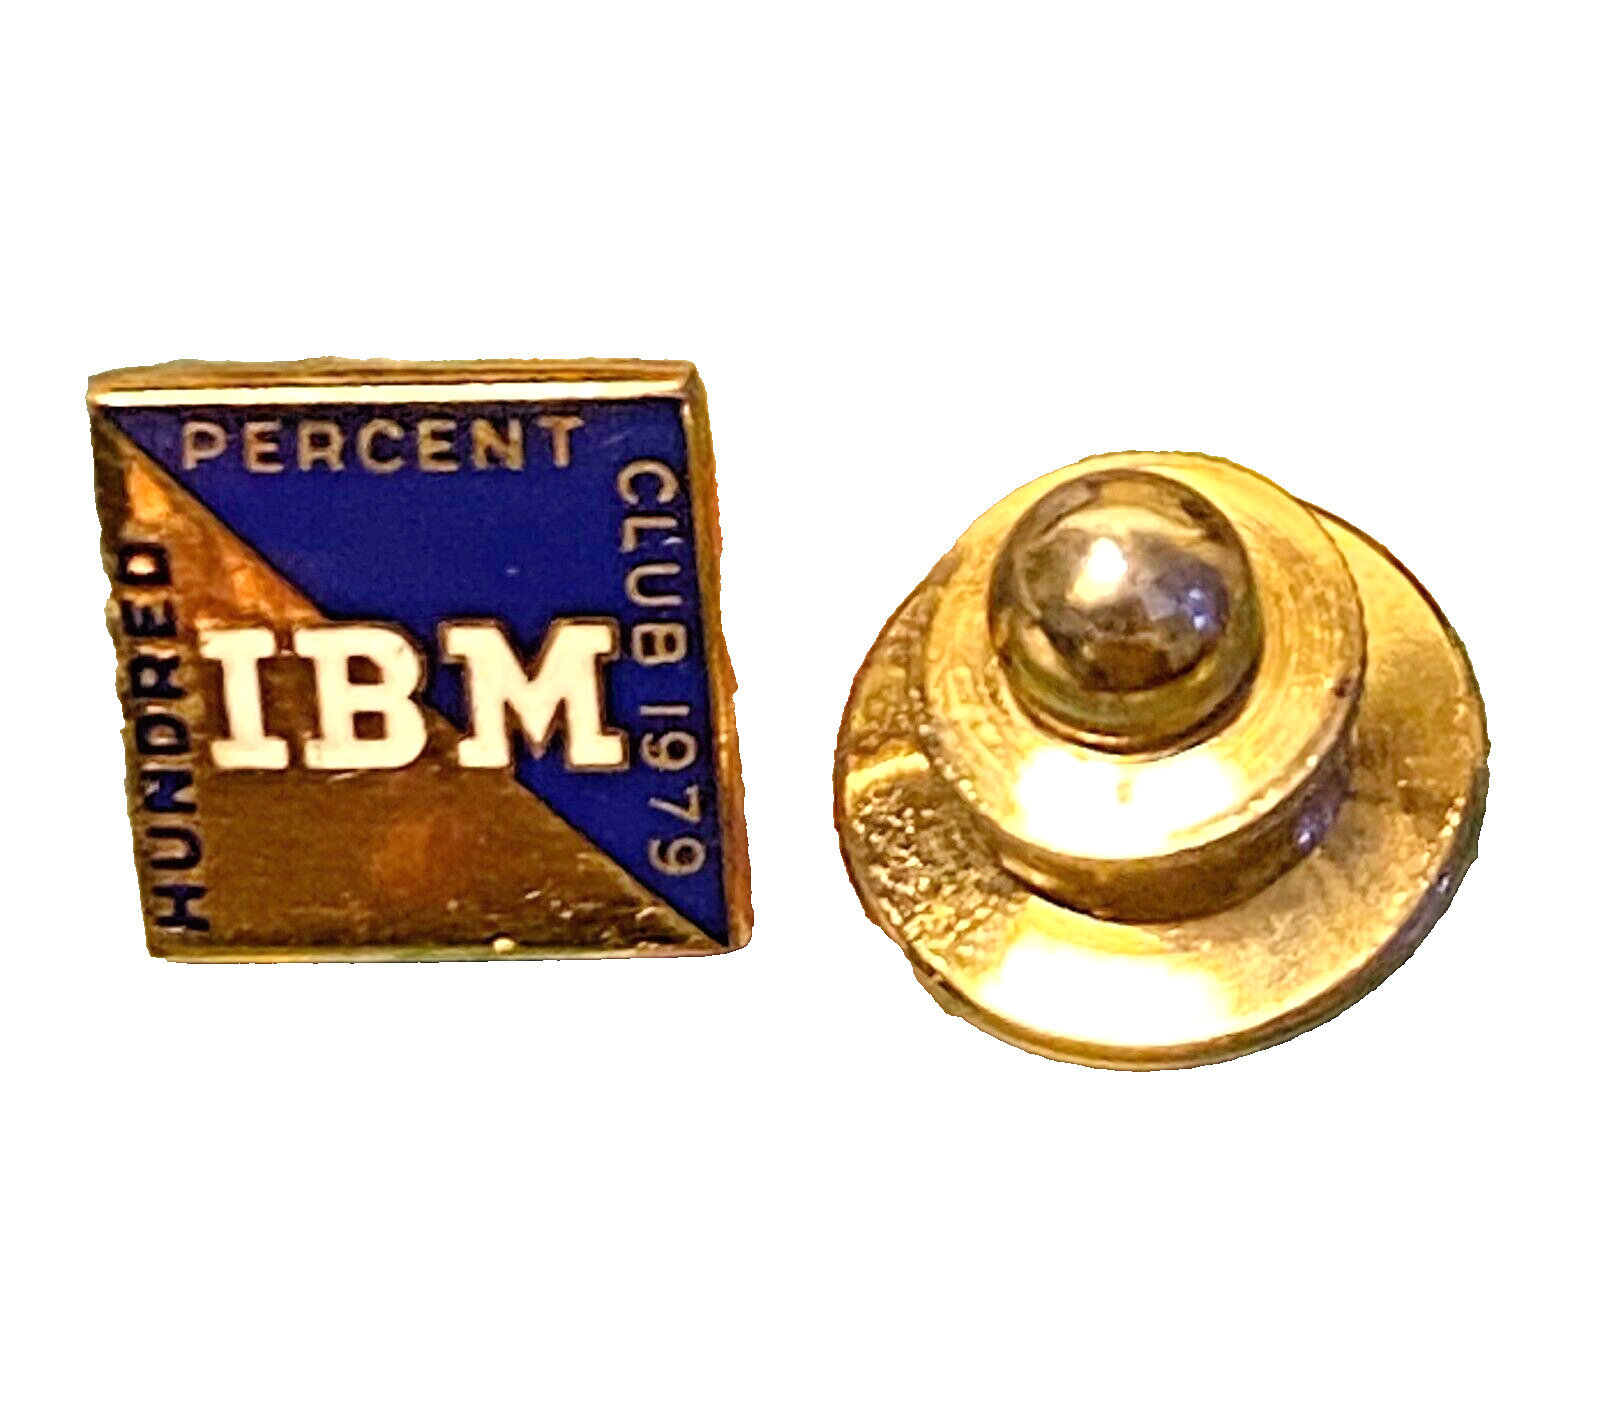 VINTAGE 1979 IBM HUNDRED PERCENT CLUB 10k GOLD 0.033 ozt COLLECTIBLE LAPEL PIN